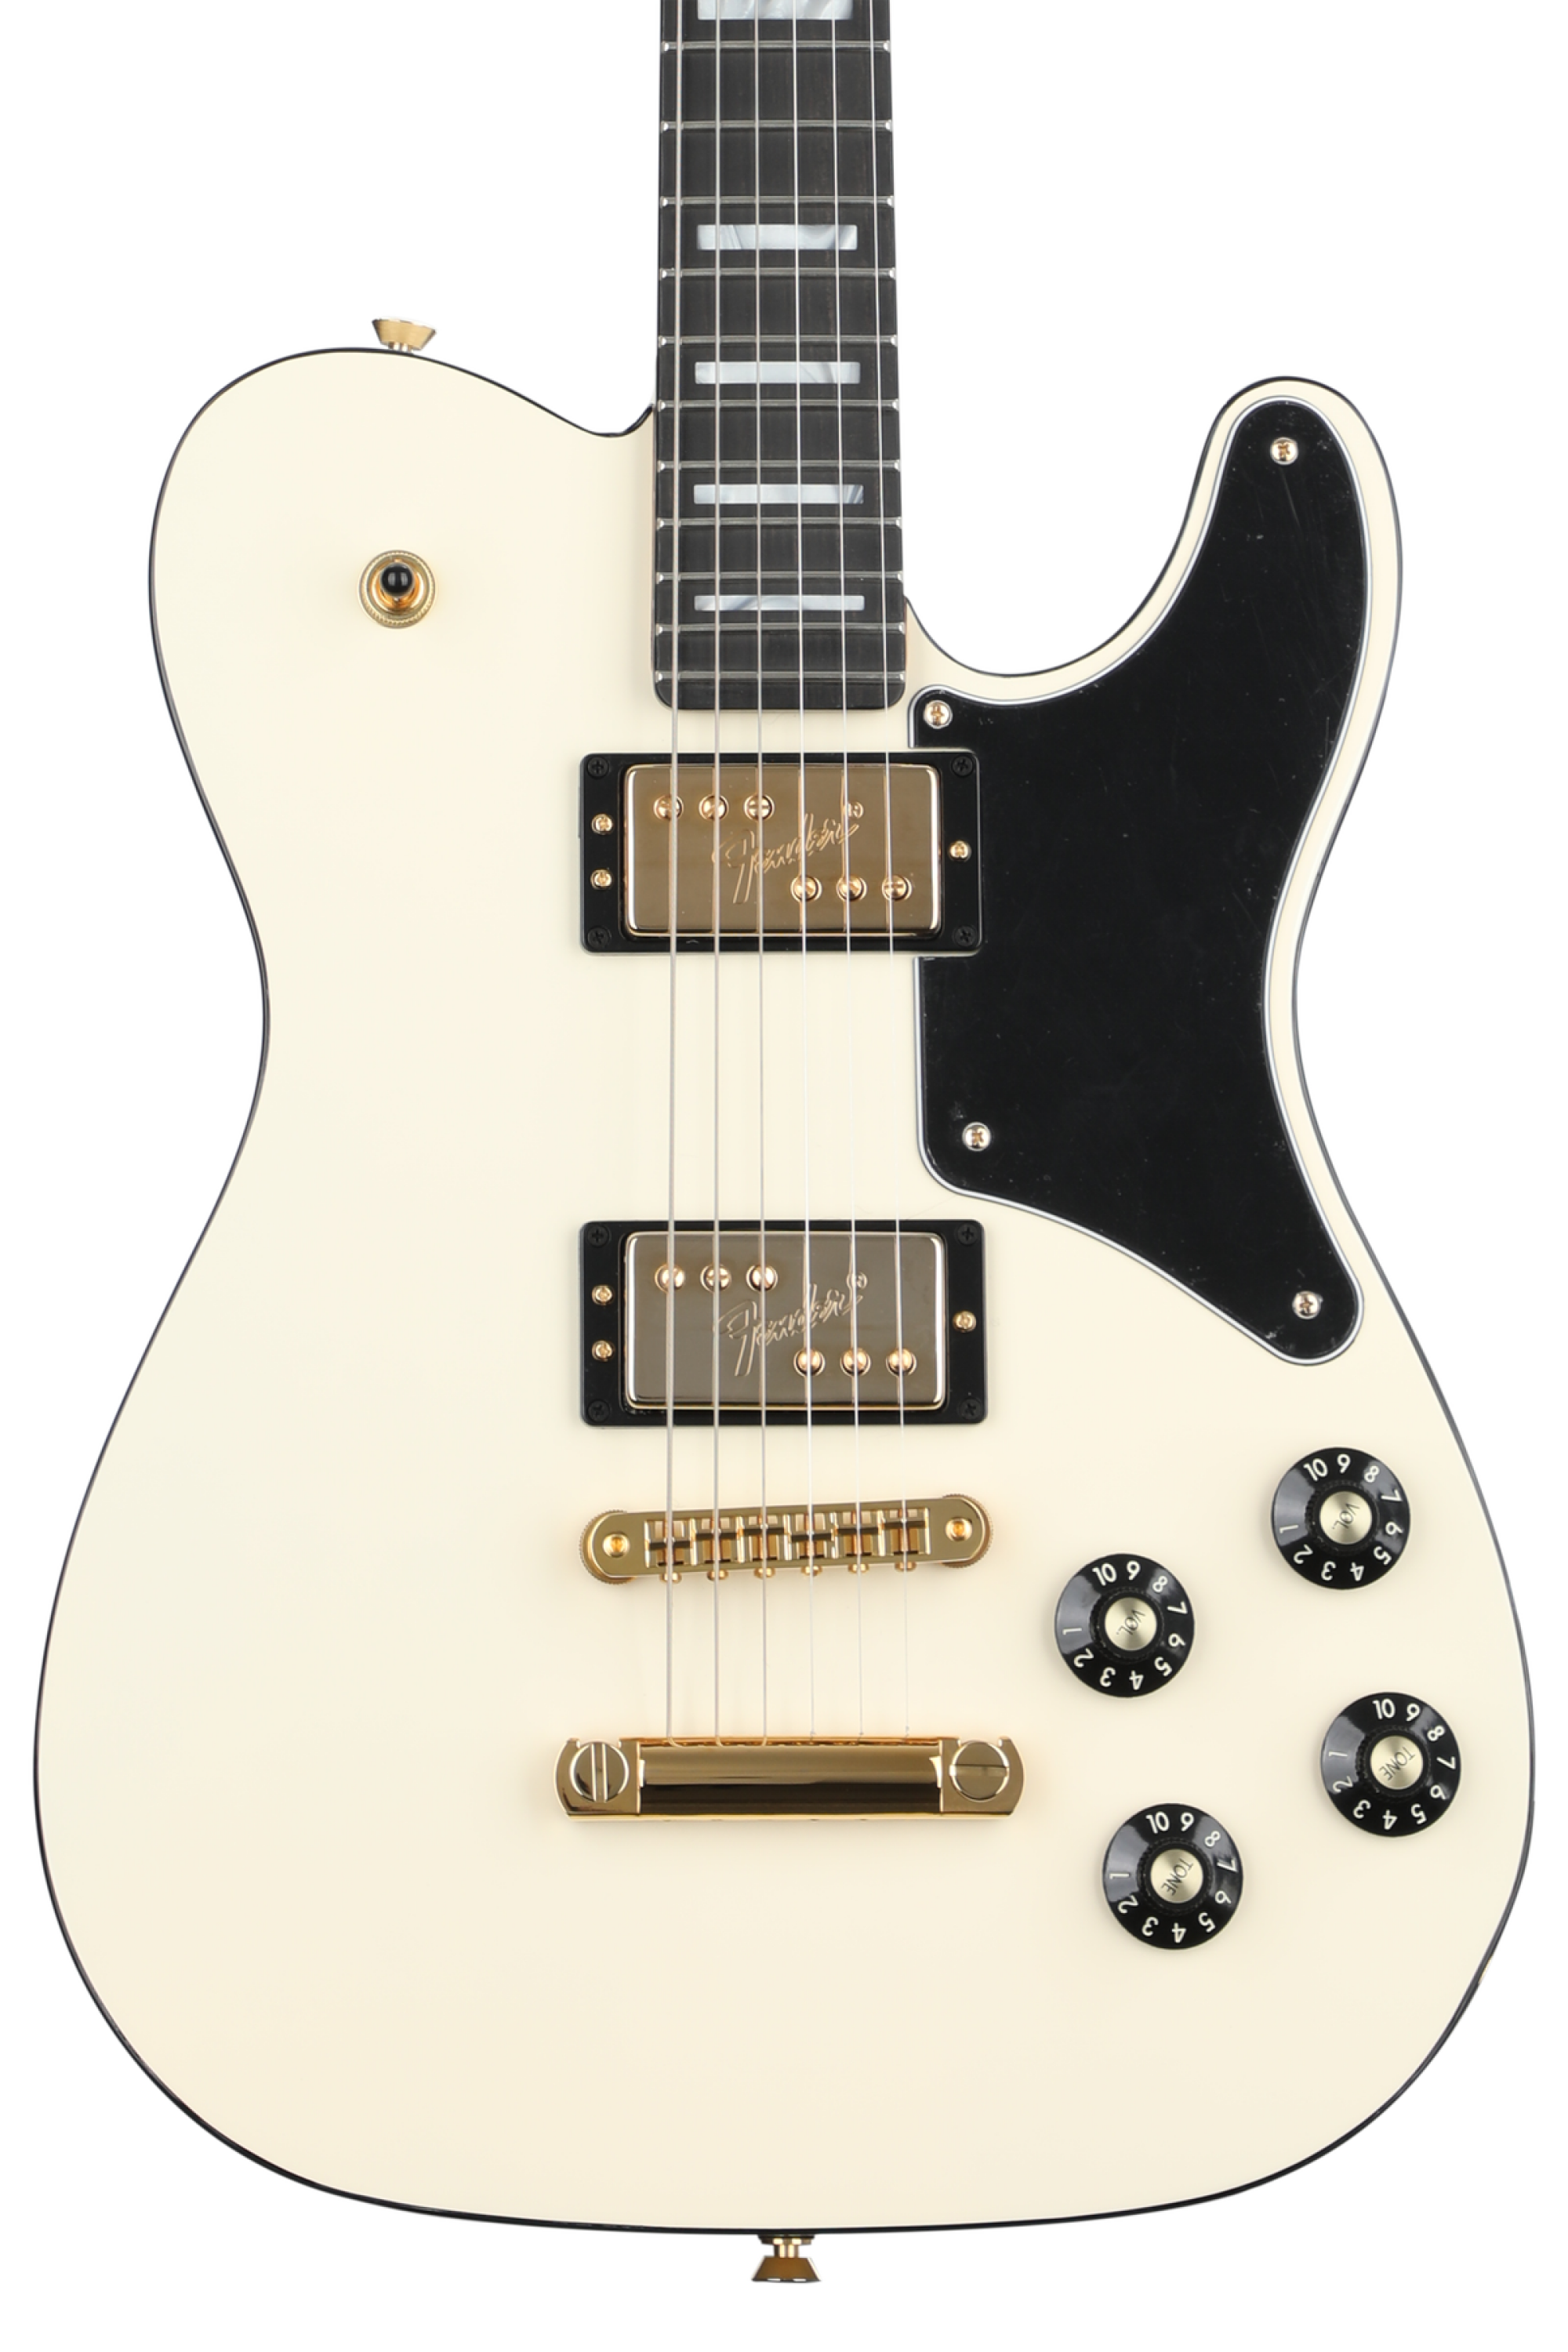 Fender Parallel Universe Volume II Troublemaker Tele Deluxe - Olympic White  | Sweetwater